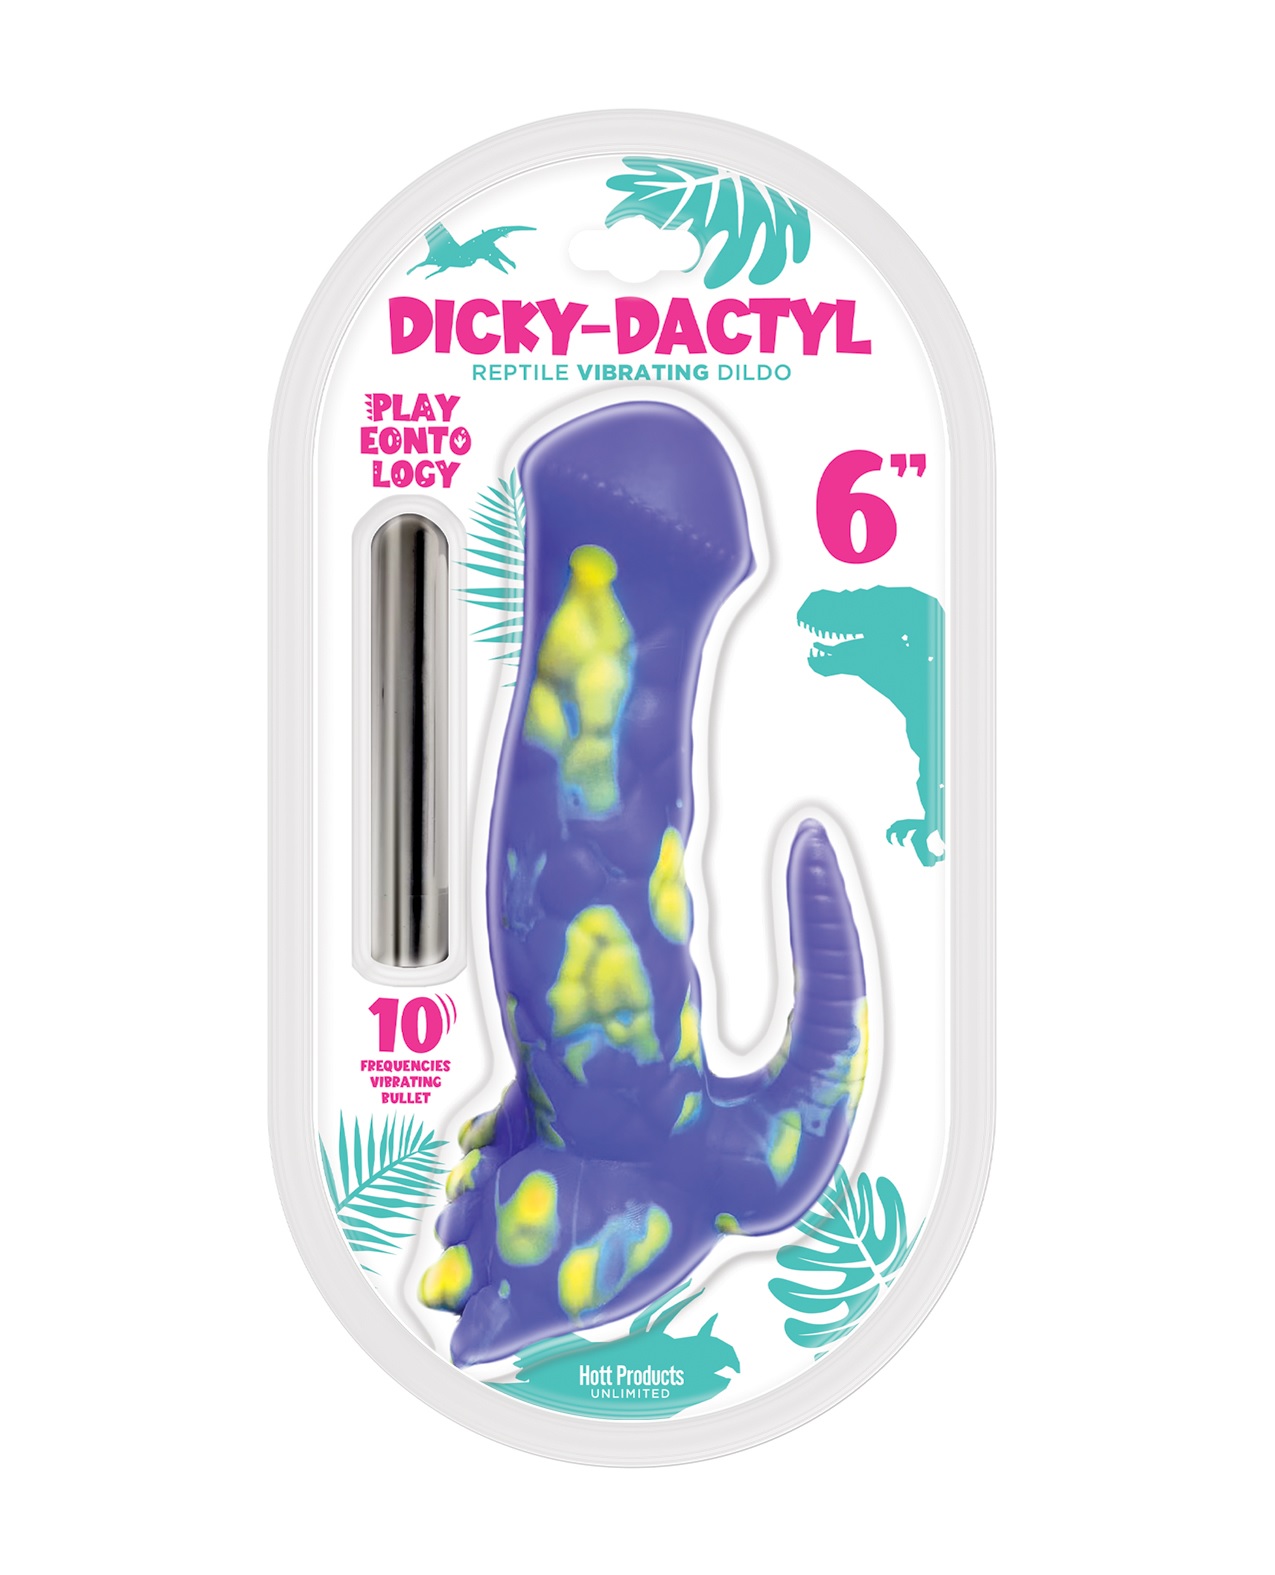 PLAYEONTOLOGY SERIES 6 IN DICKYDACTYL VIBRATING DILDO